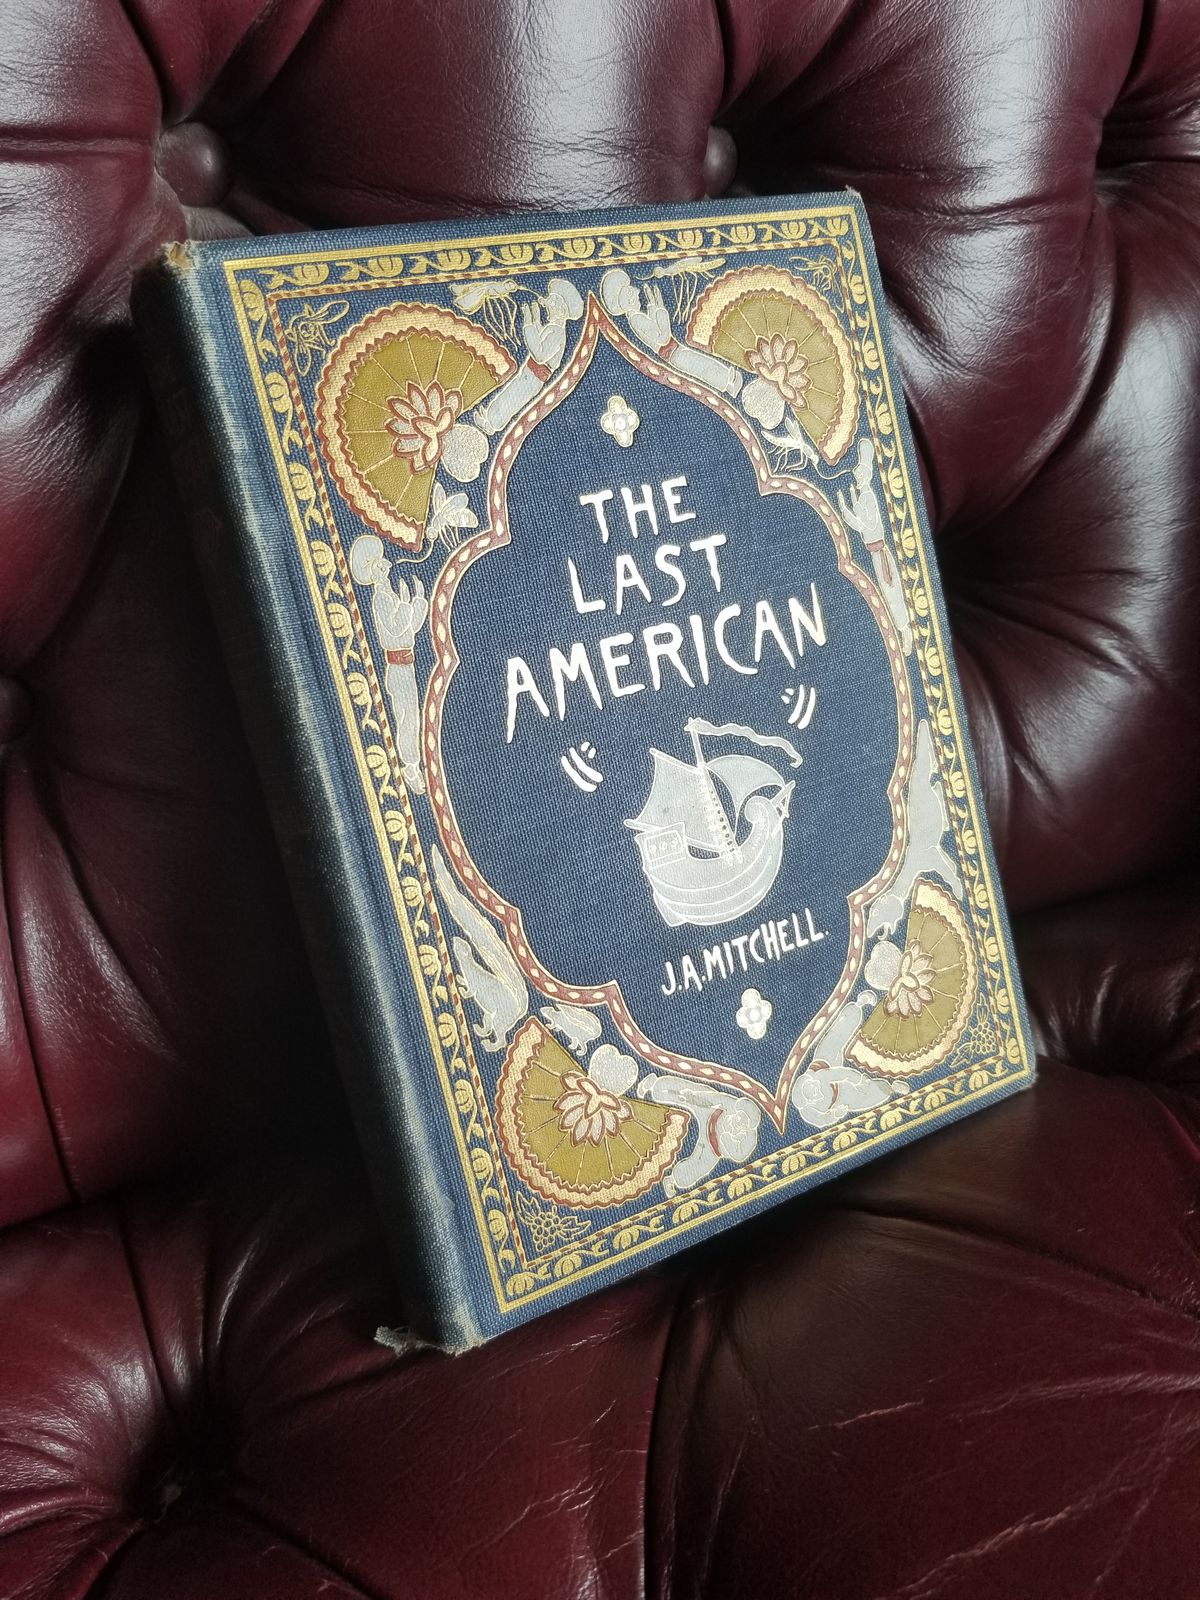 Judging a Book by its Cover - The Last American